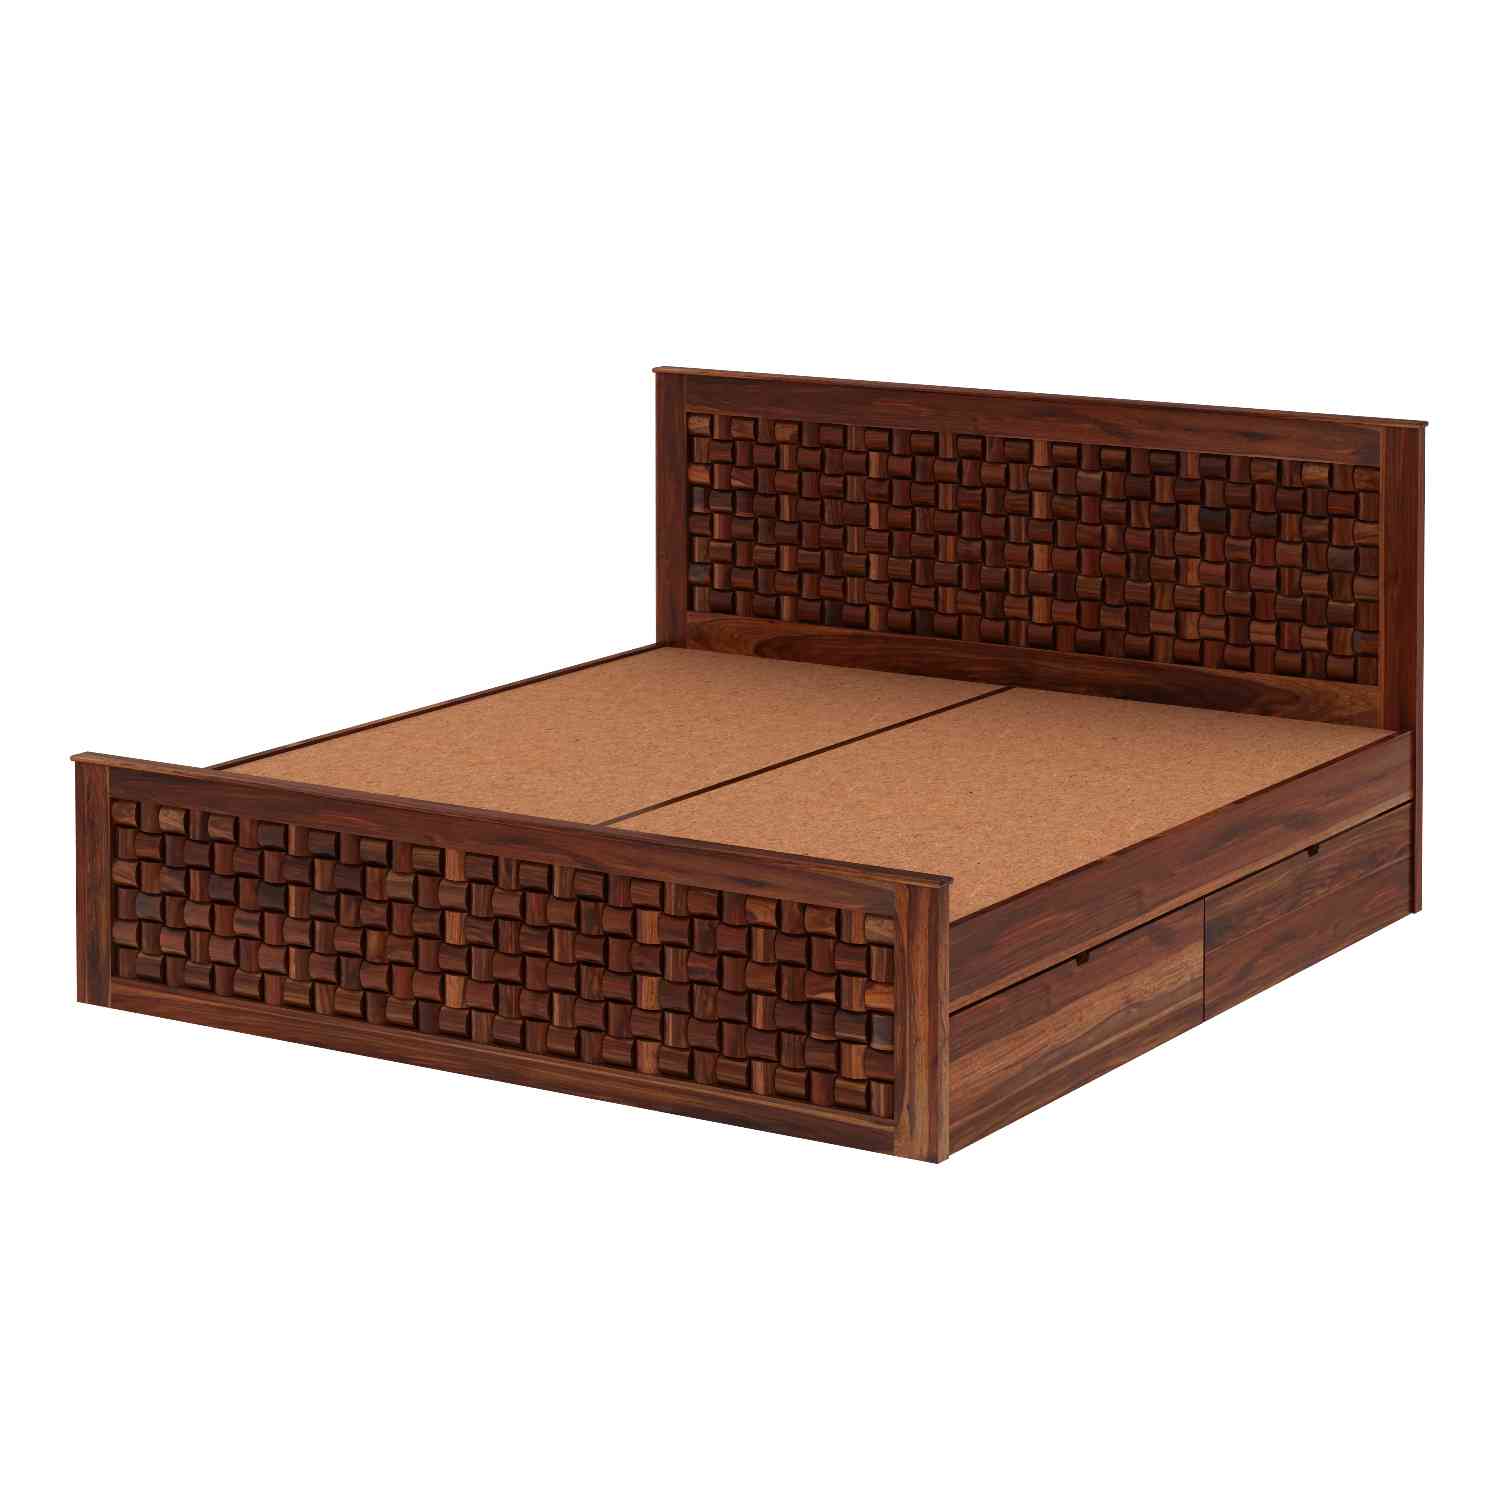 Olivia Solid Sheesham Wood Bed With Four Drawers (Queen Size, Natural Finish)